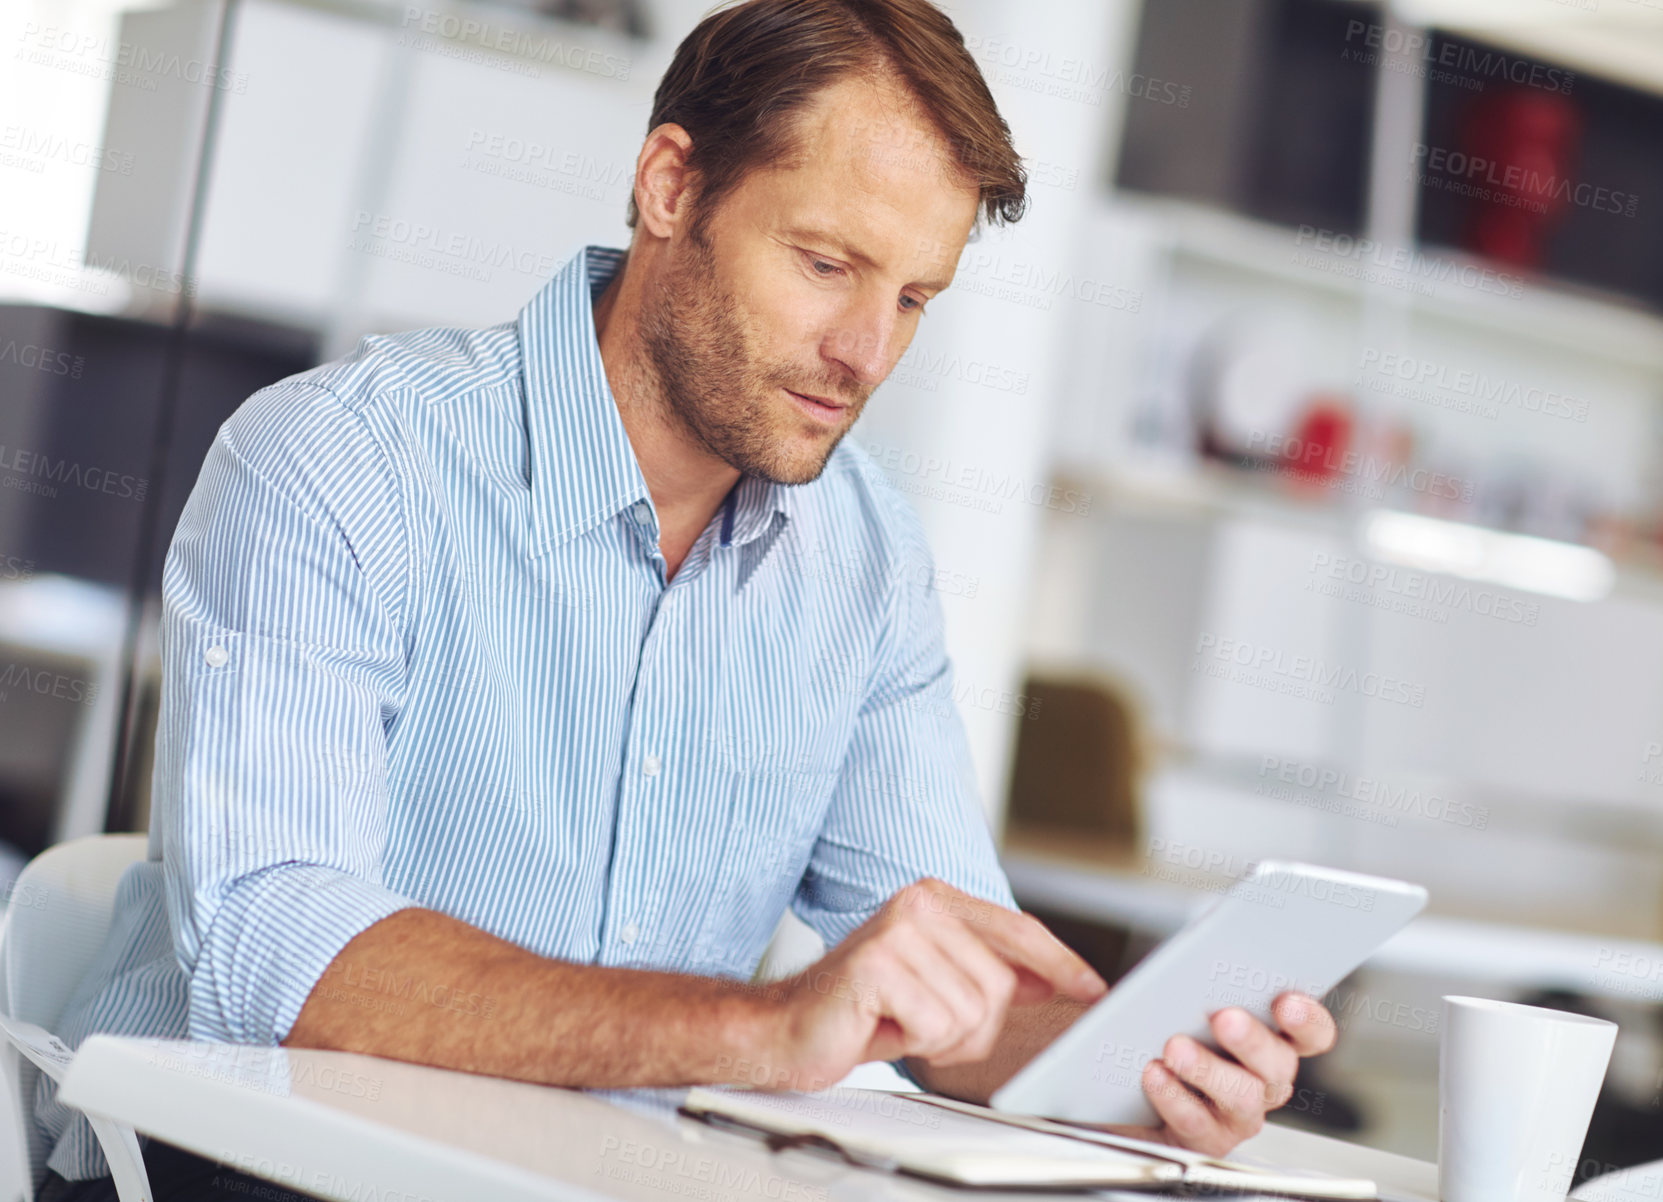 Buy stock photo Cropped shot of a mature businssman using a digital tablet at his desk in the office